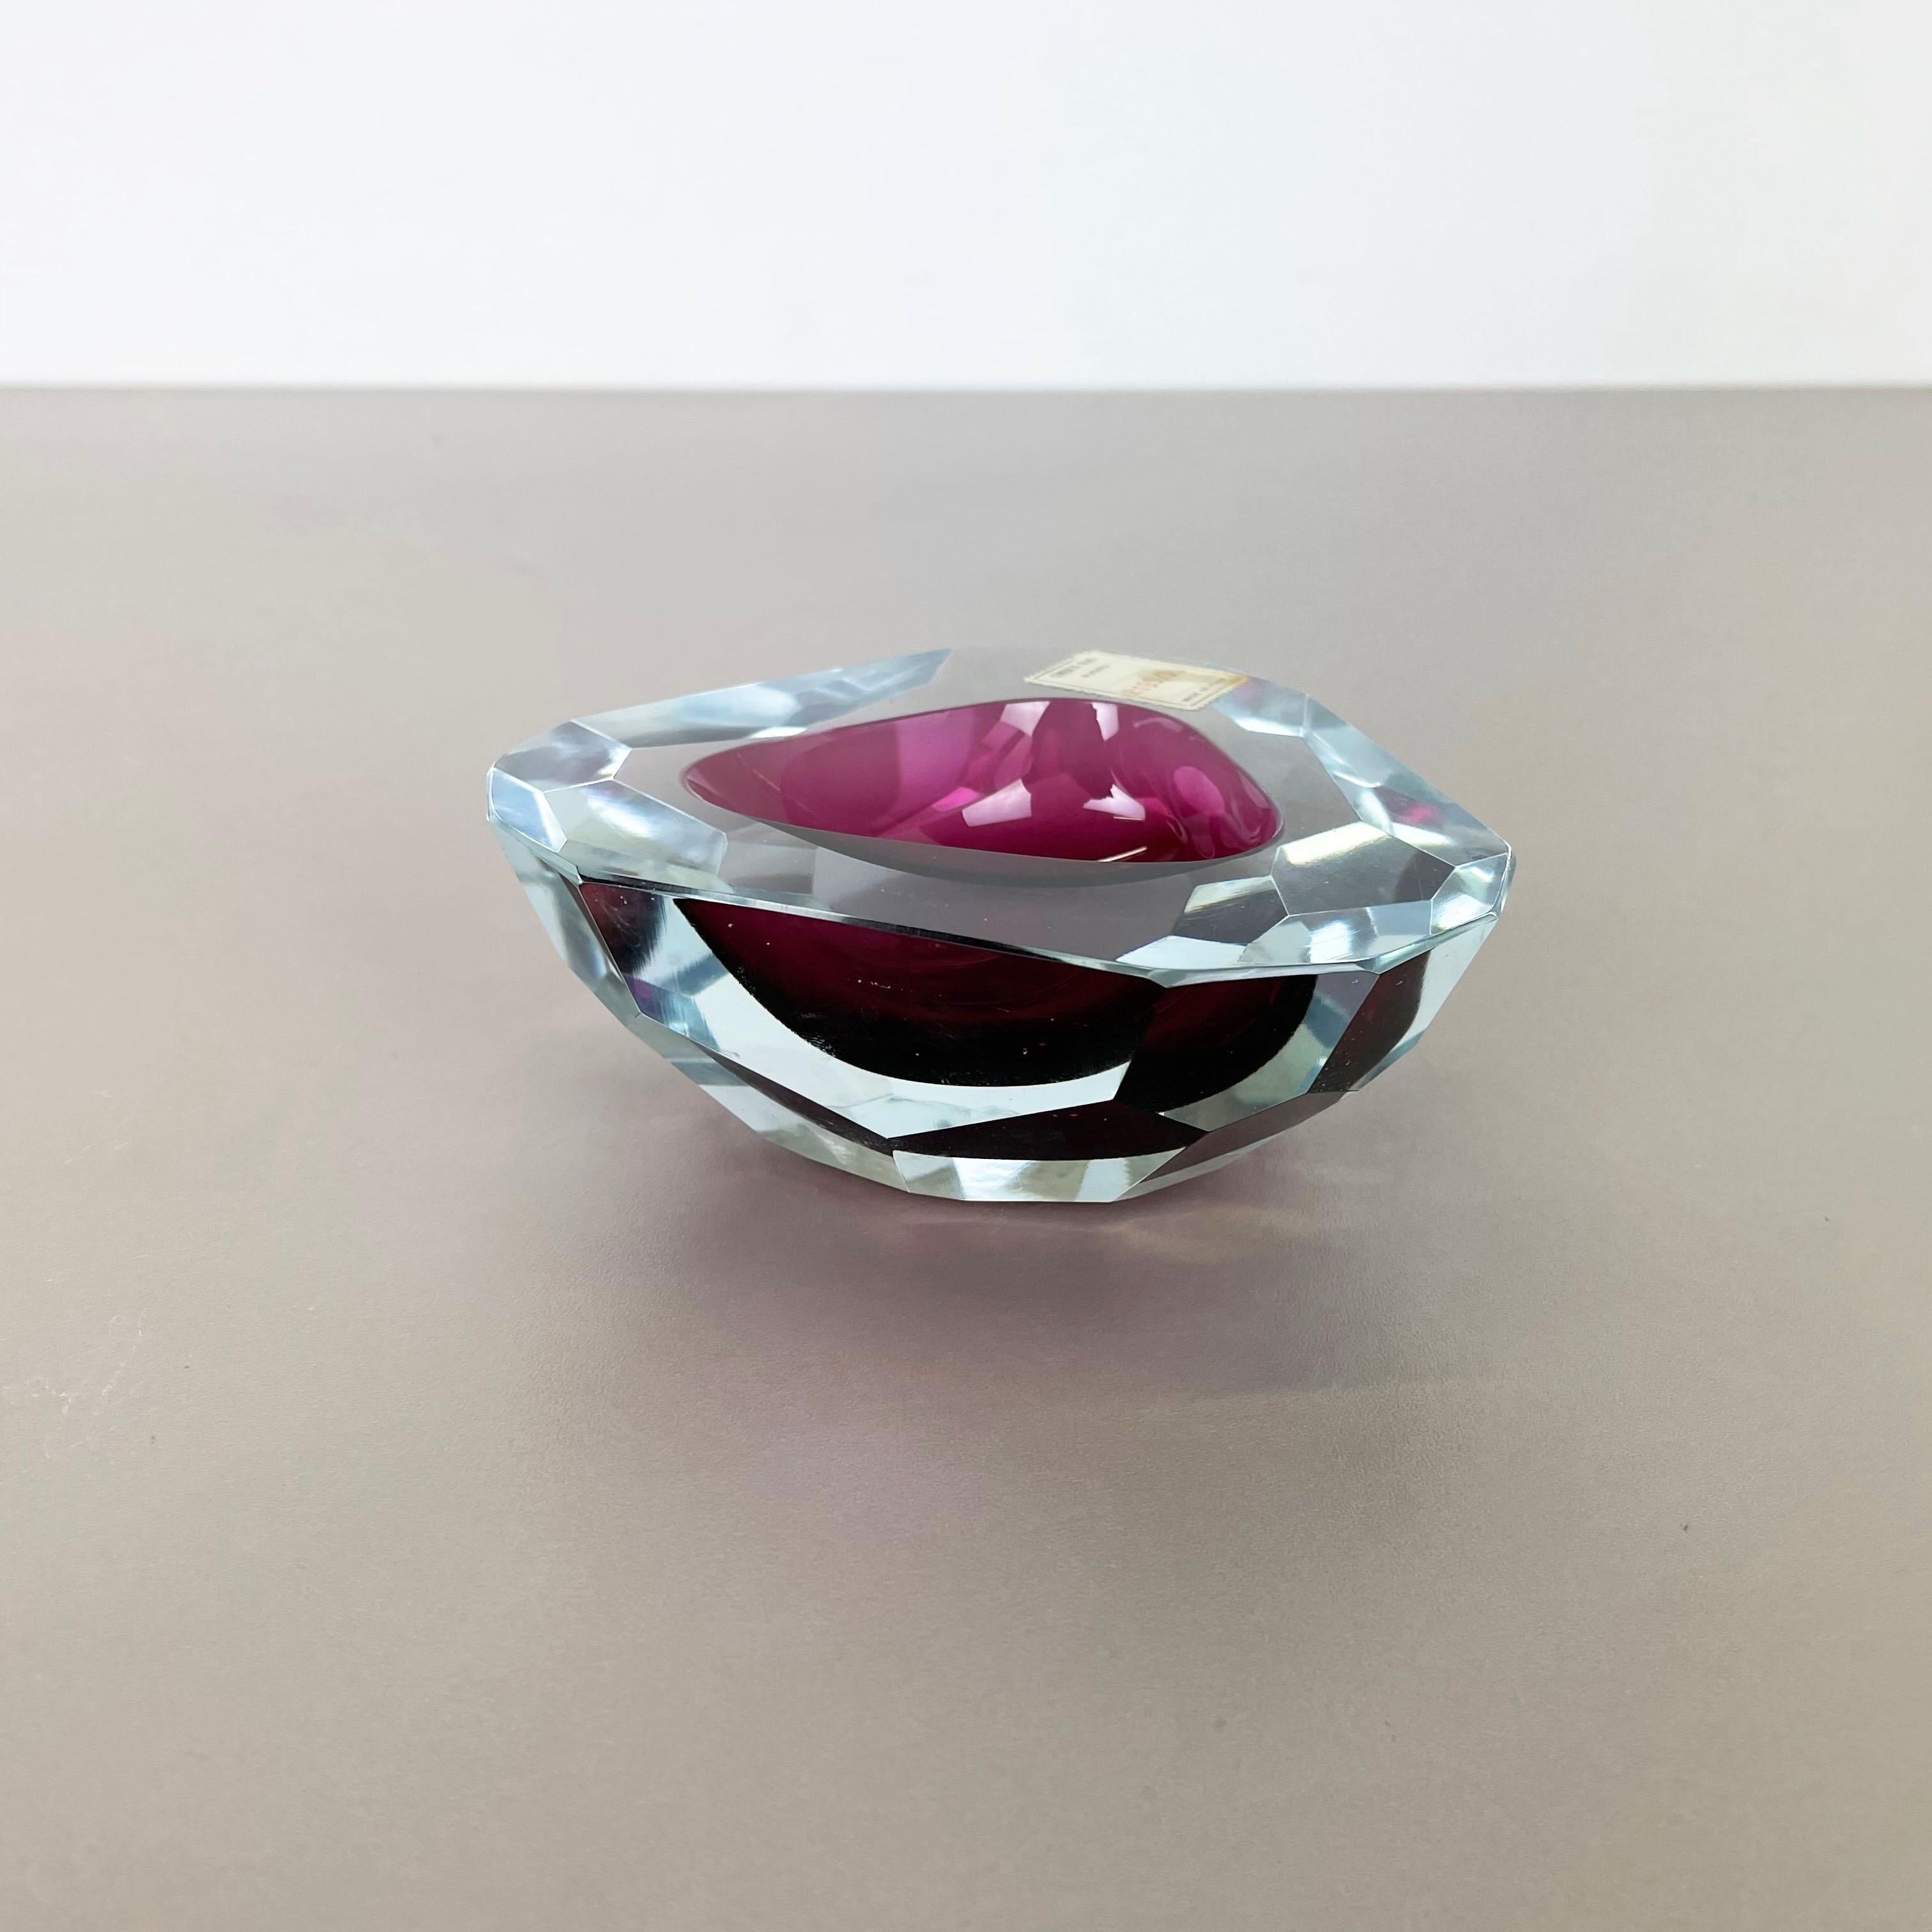 20th Century Large Murano Glass Faceted Sommerso Bowl Ashtray by Cenedese, Murano Italy 1970s